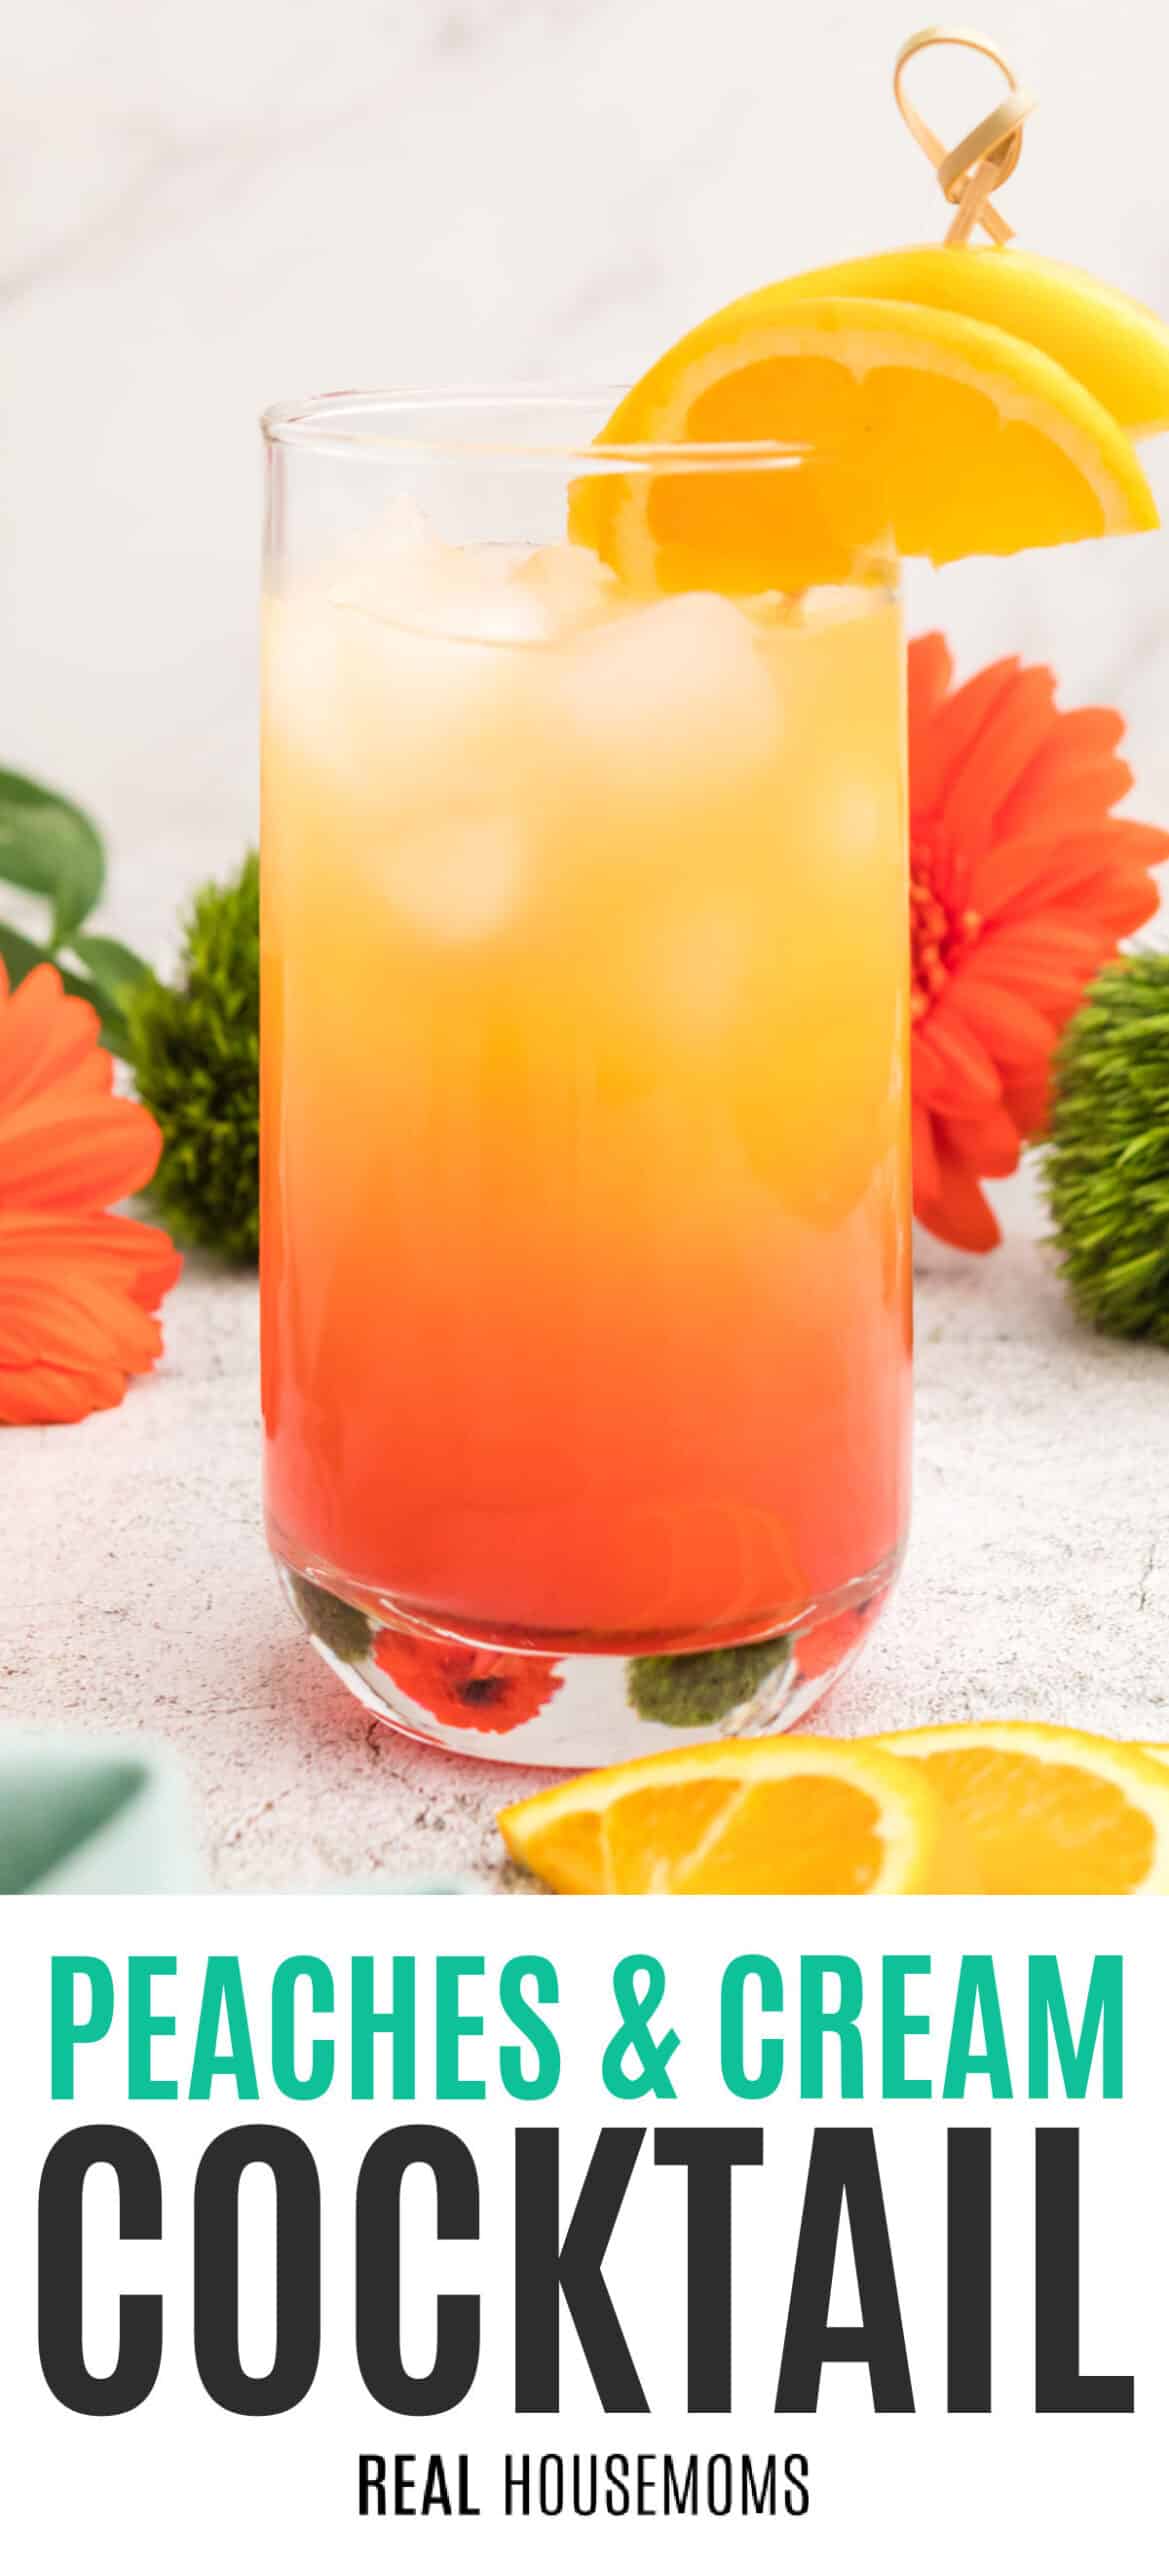 A delicious juicy taste of summer. Whole Punch: Double Dreamsicle